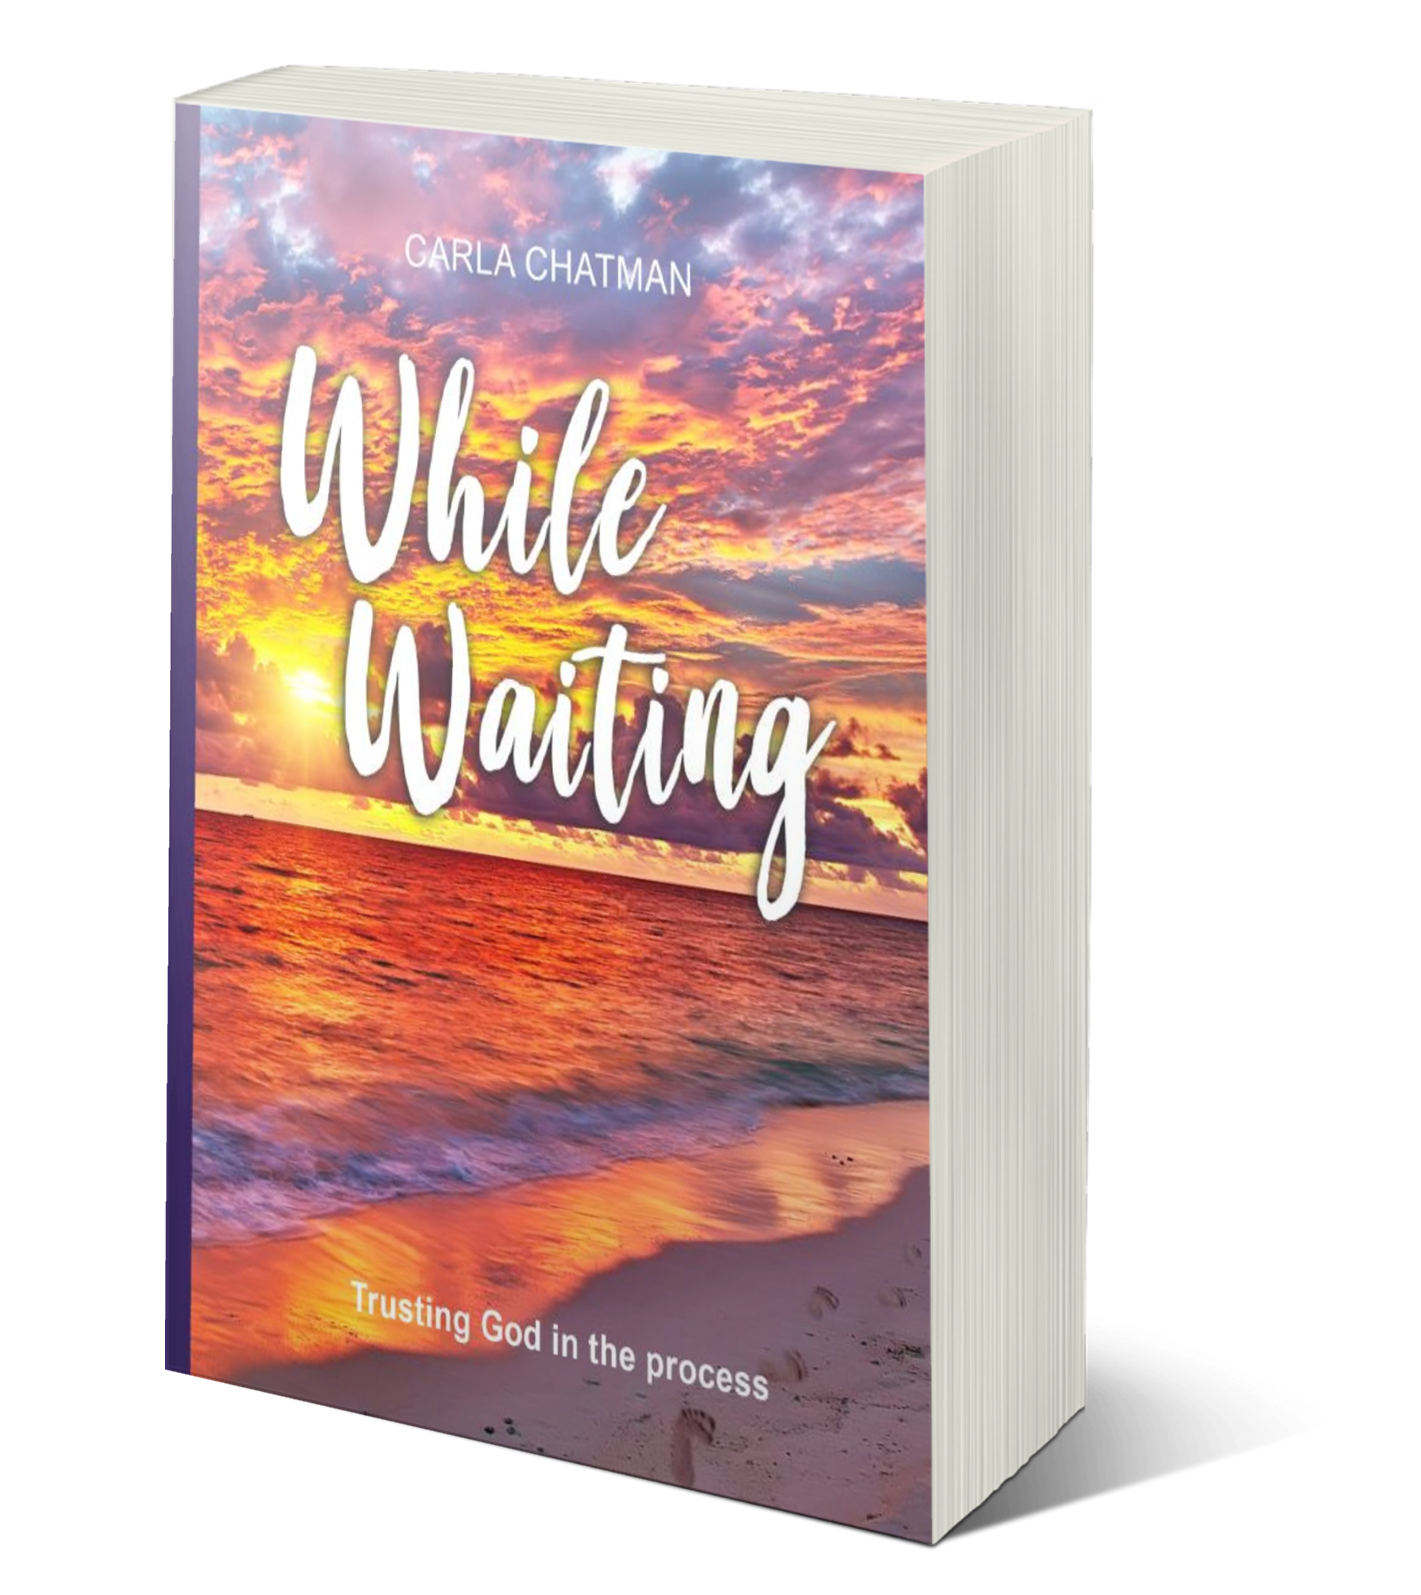 While Waiting by Carla Chatman